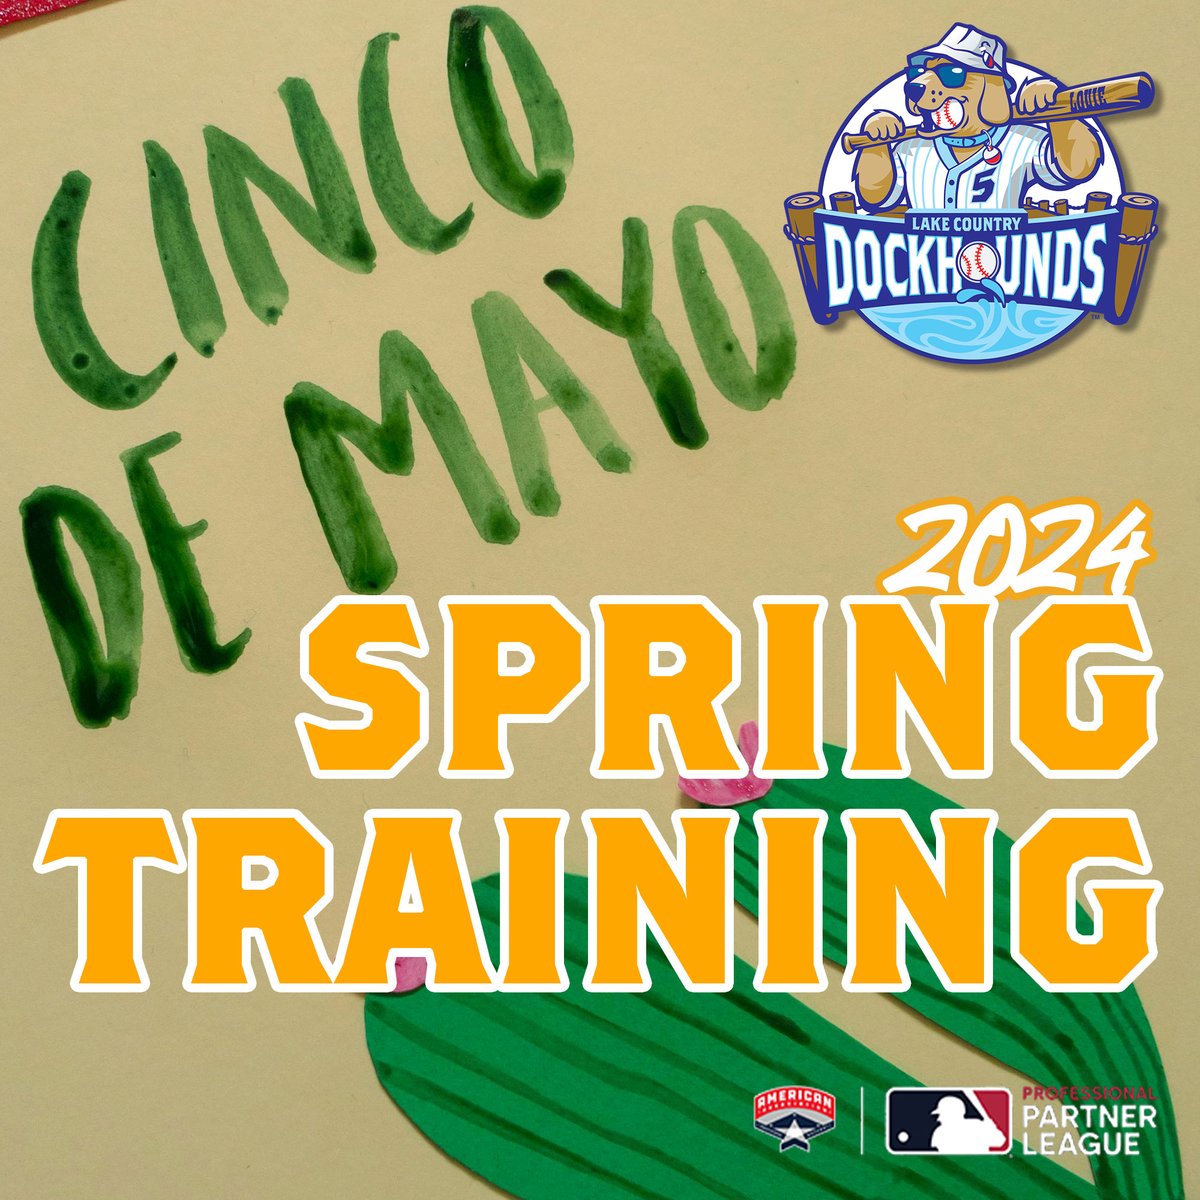 The Lake Country DockHounds take on the Black Sox in their 2024 Spring Training matchup, May 5th. First pitch at 1:05pm. General admission tickets are $5, kids 12 and under are free, but will need to 'purchase' a ticket to gain entrance to the stadium. dockhounds.com/2024-spring-tr…